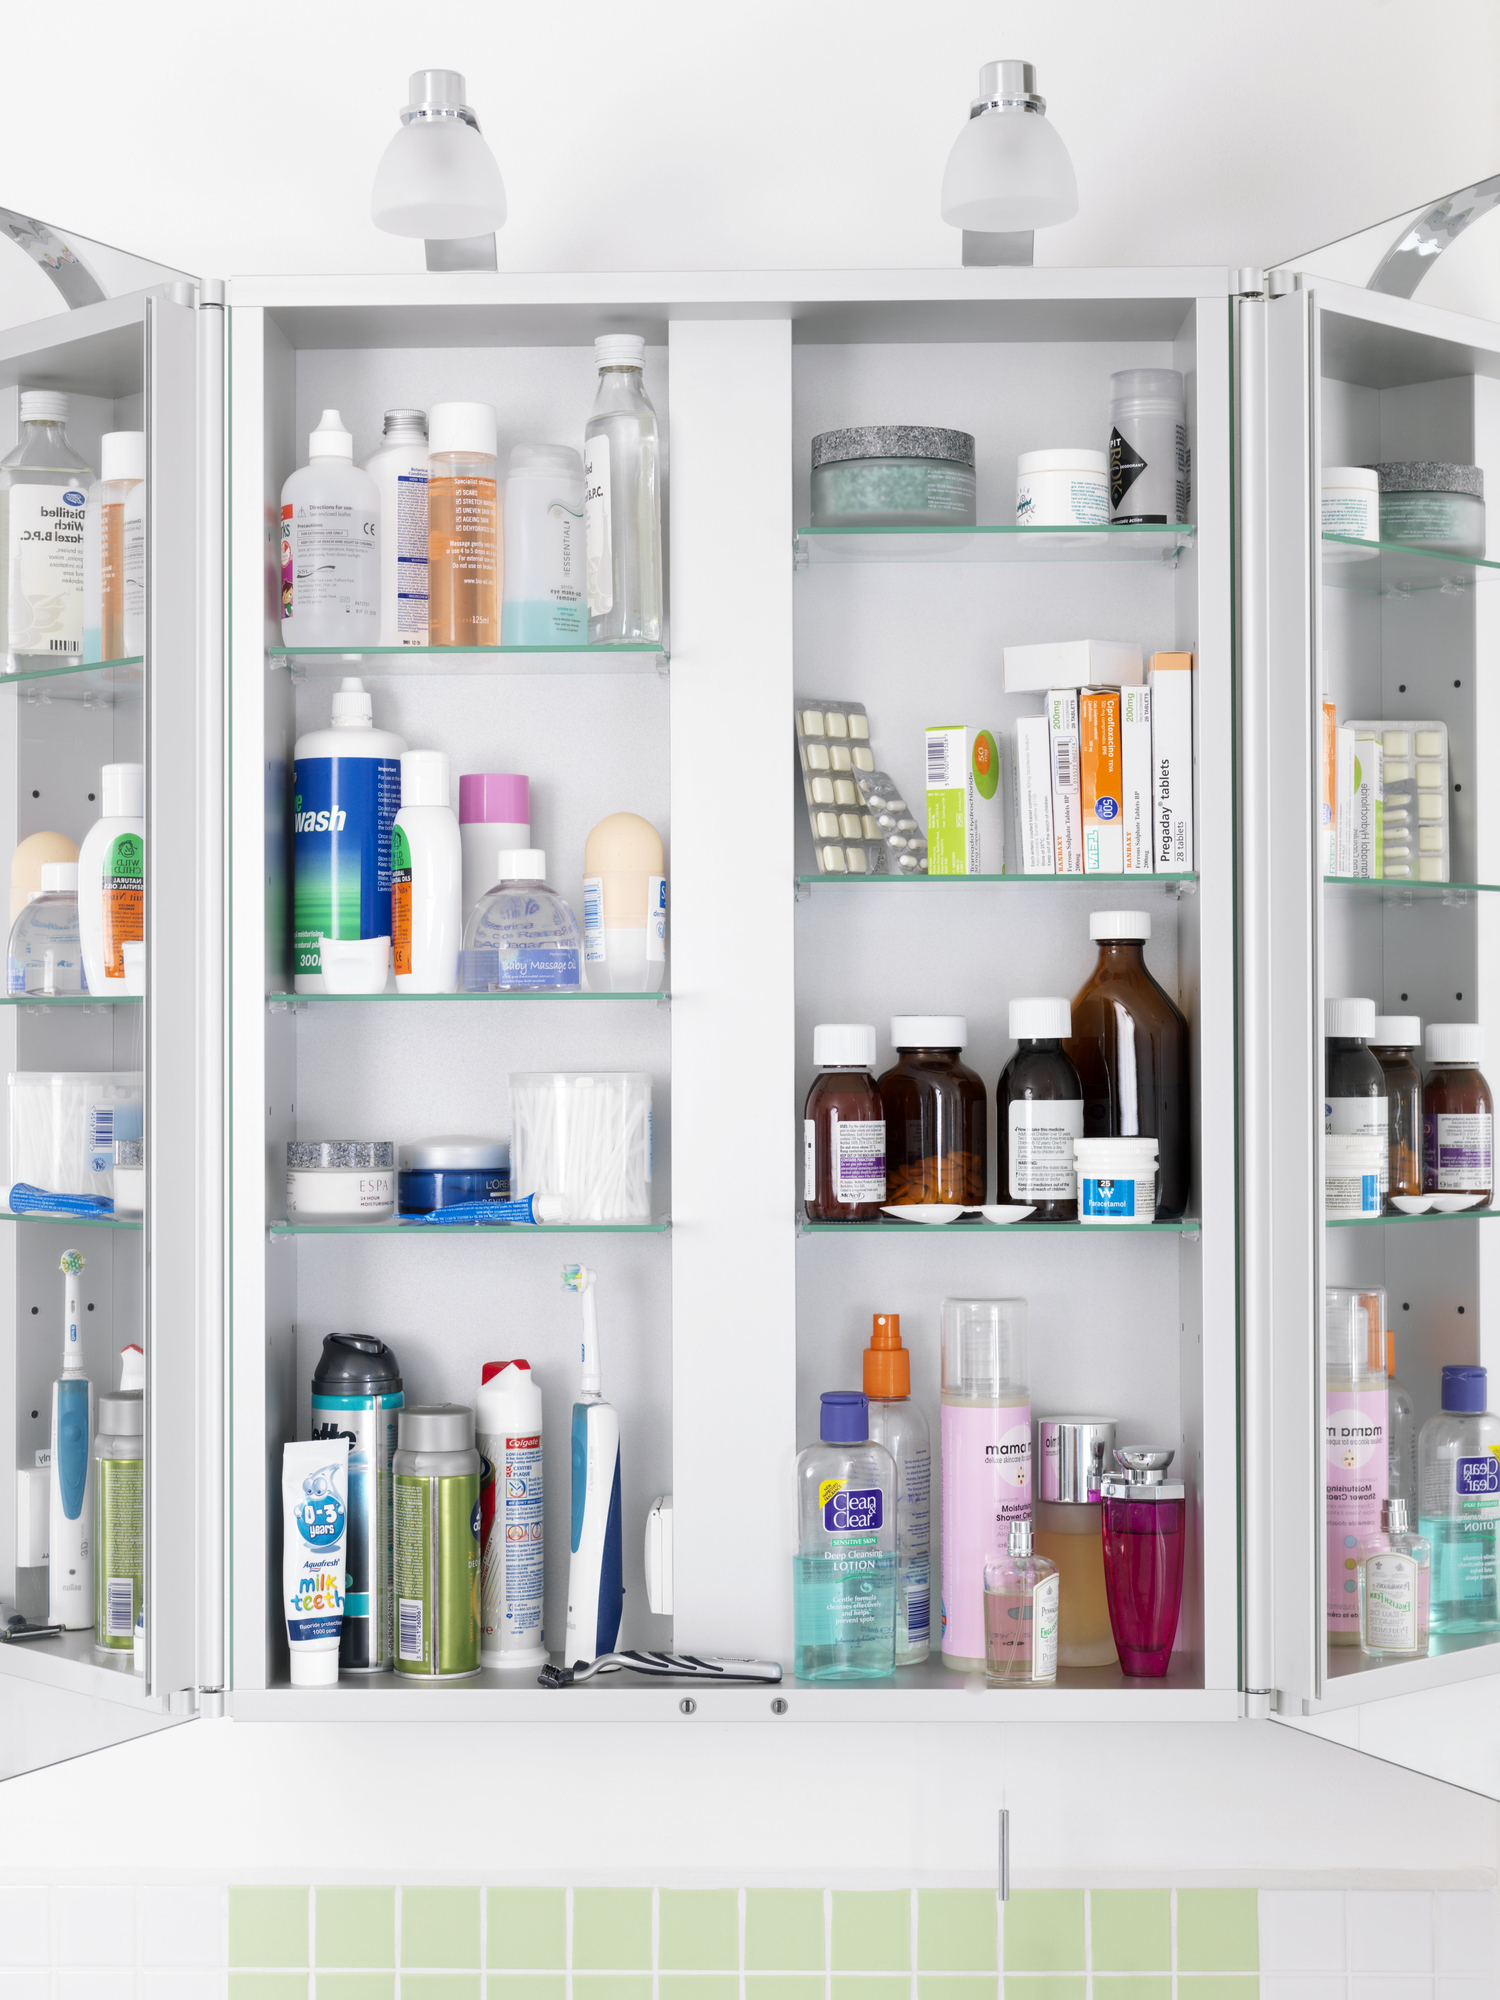 A medicine cabinet open displaying various personal care products and medications neatly arranged on shelves